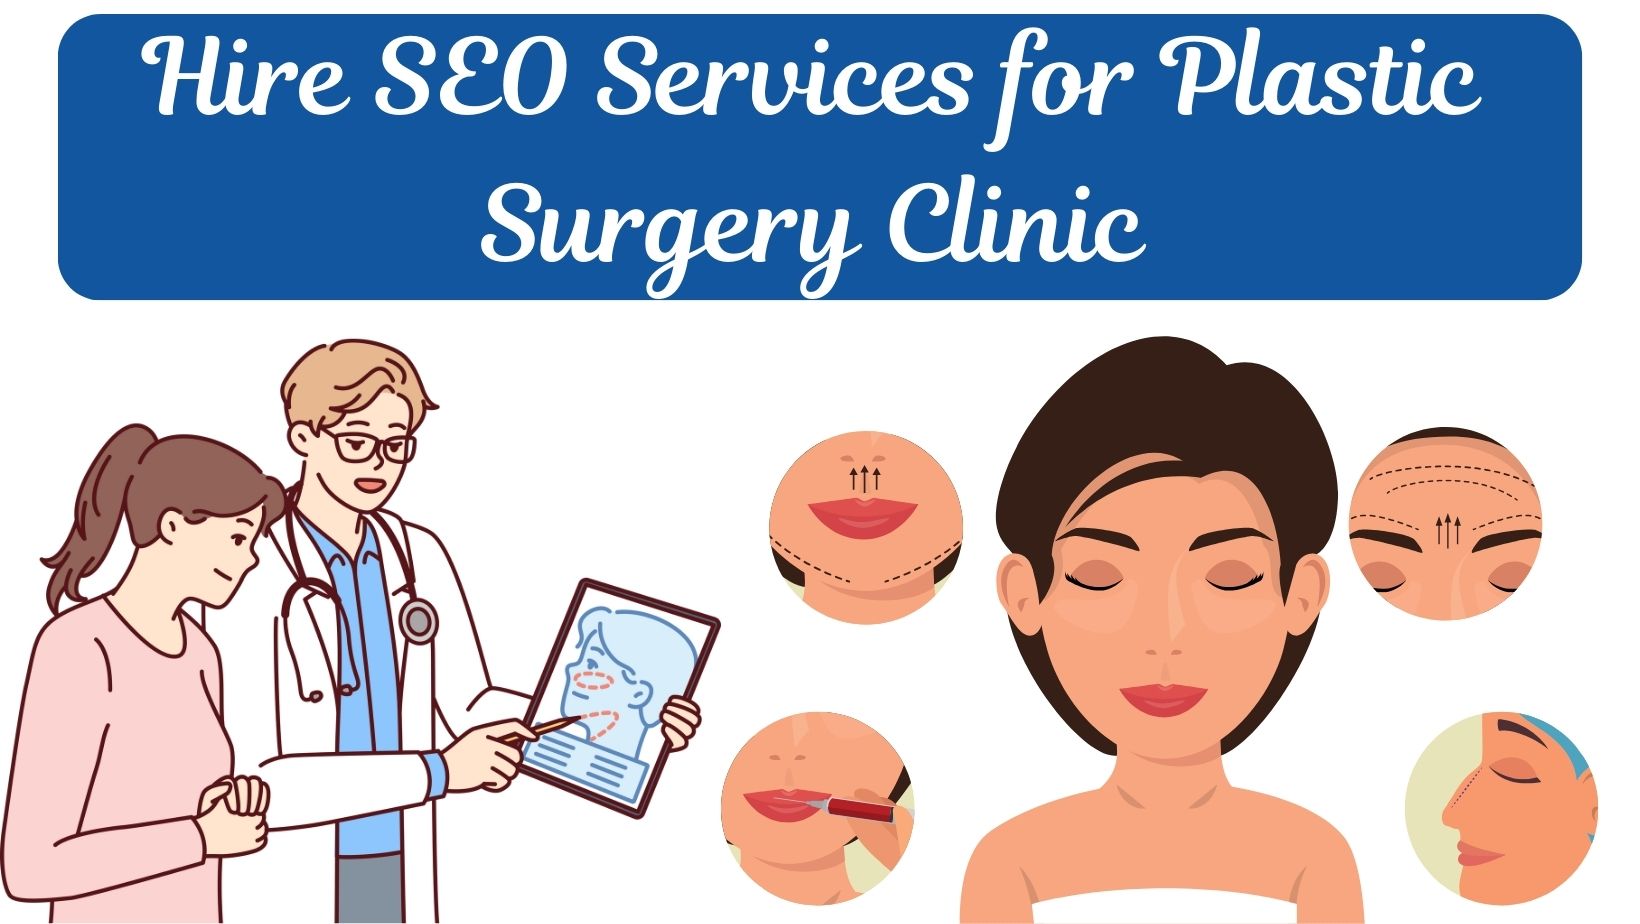 Hire SEO Services for Plastic Surgery Clinic